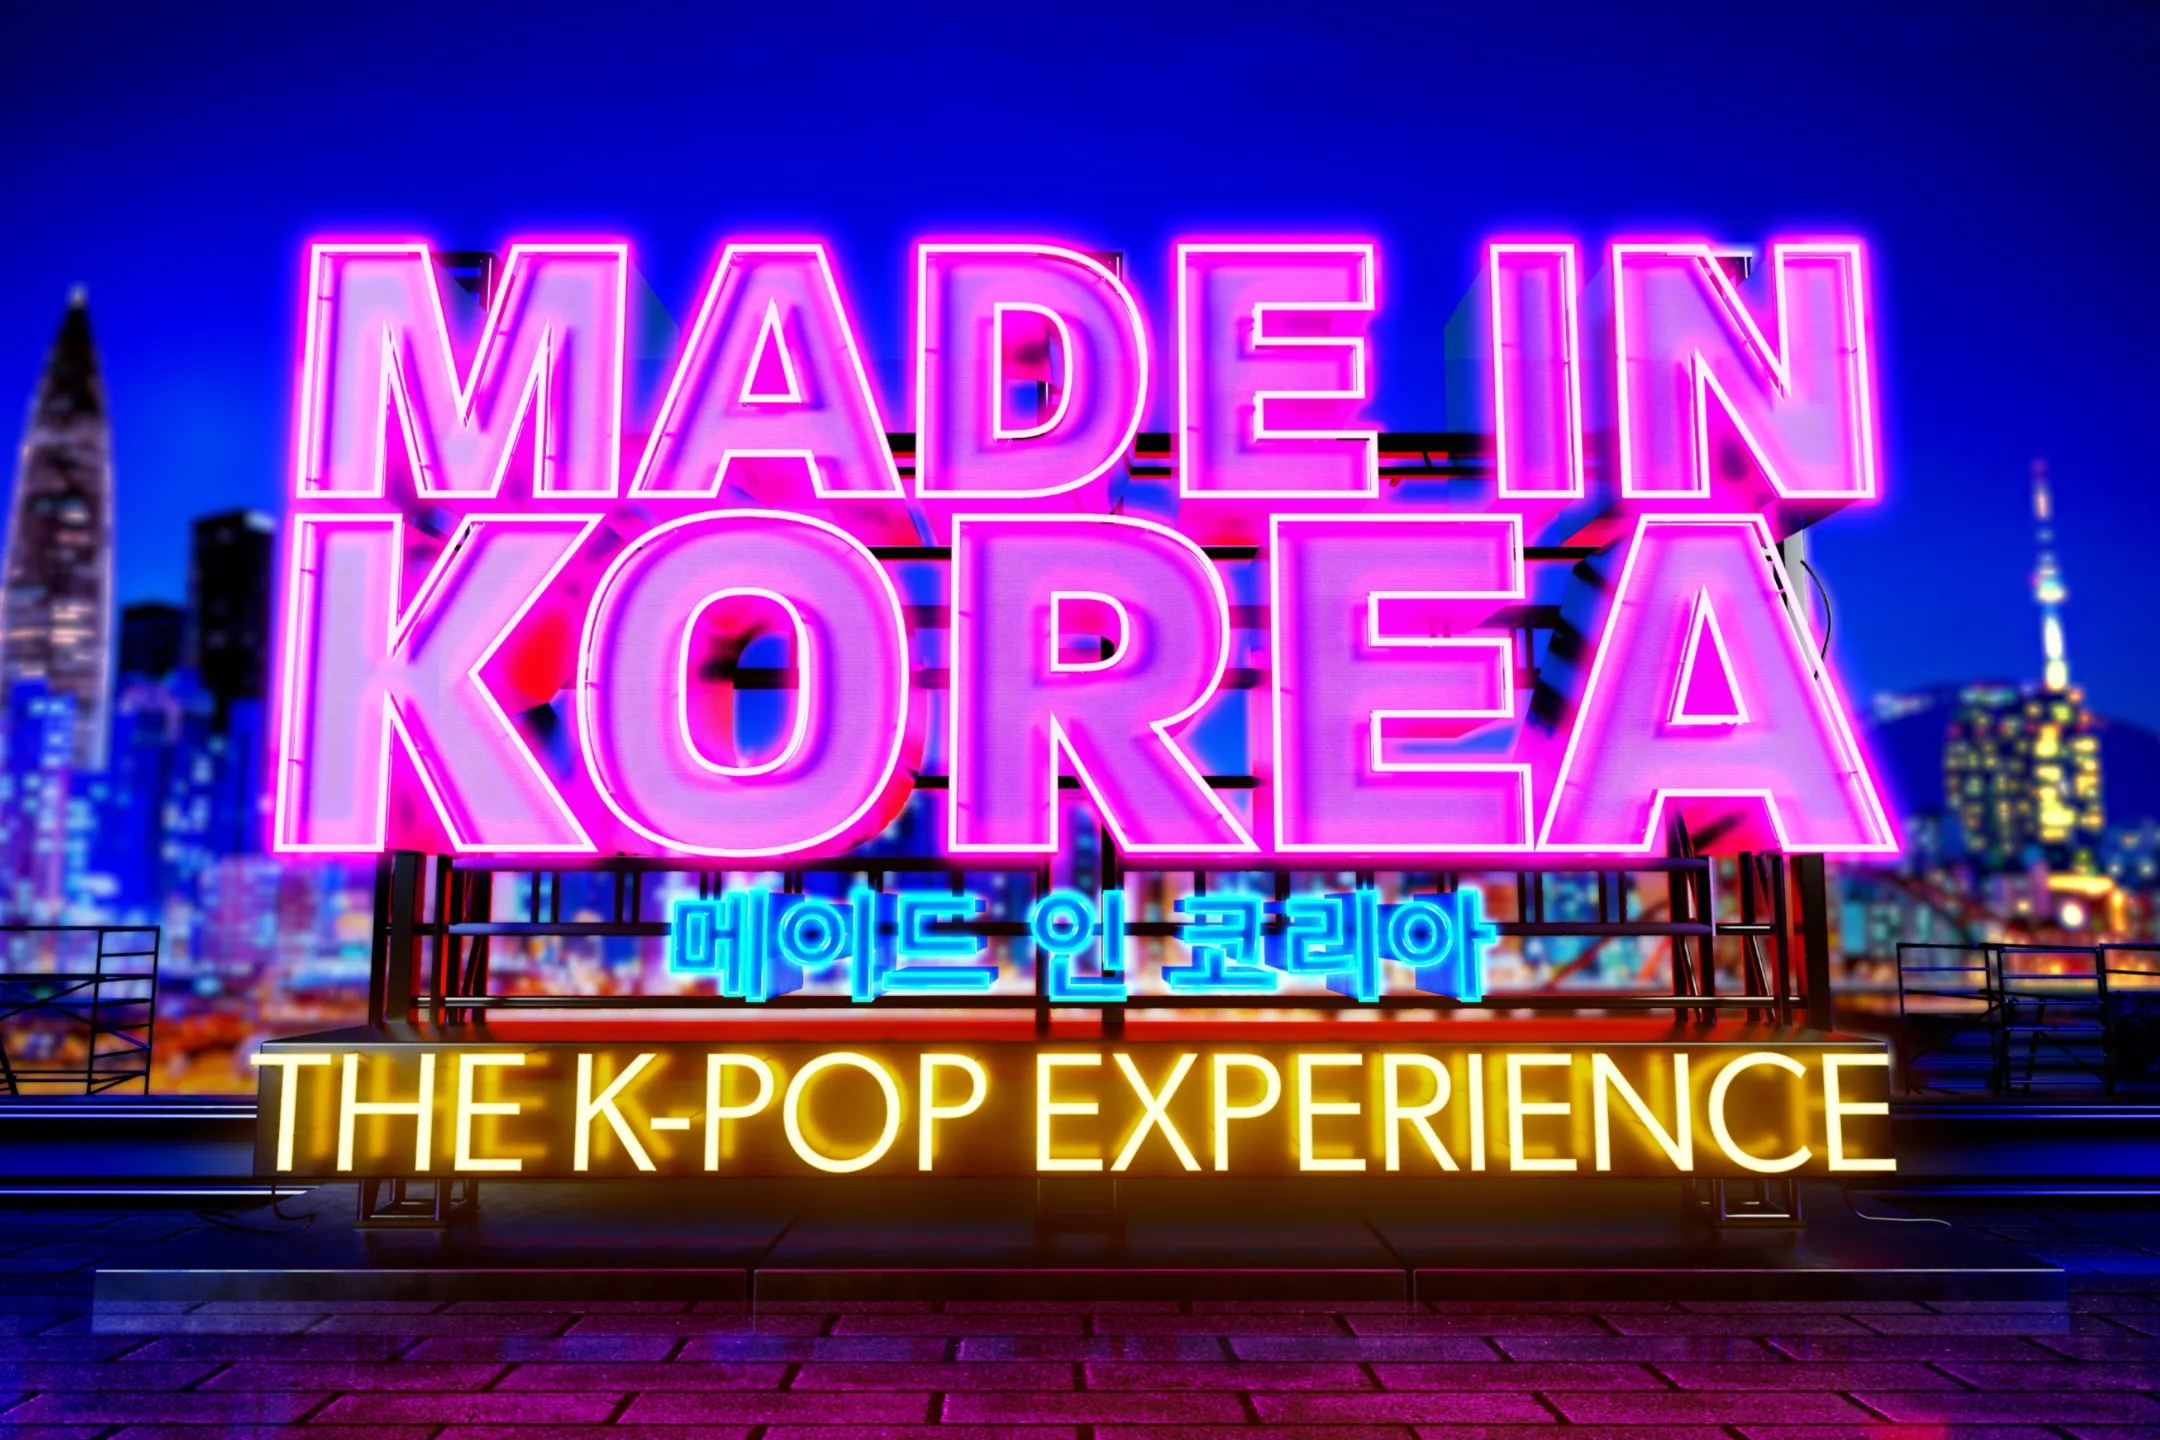 Made in Korea lit up on a rooftop in neon lights